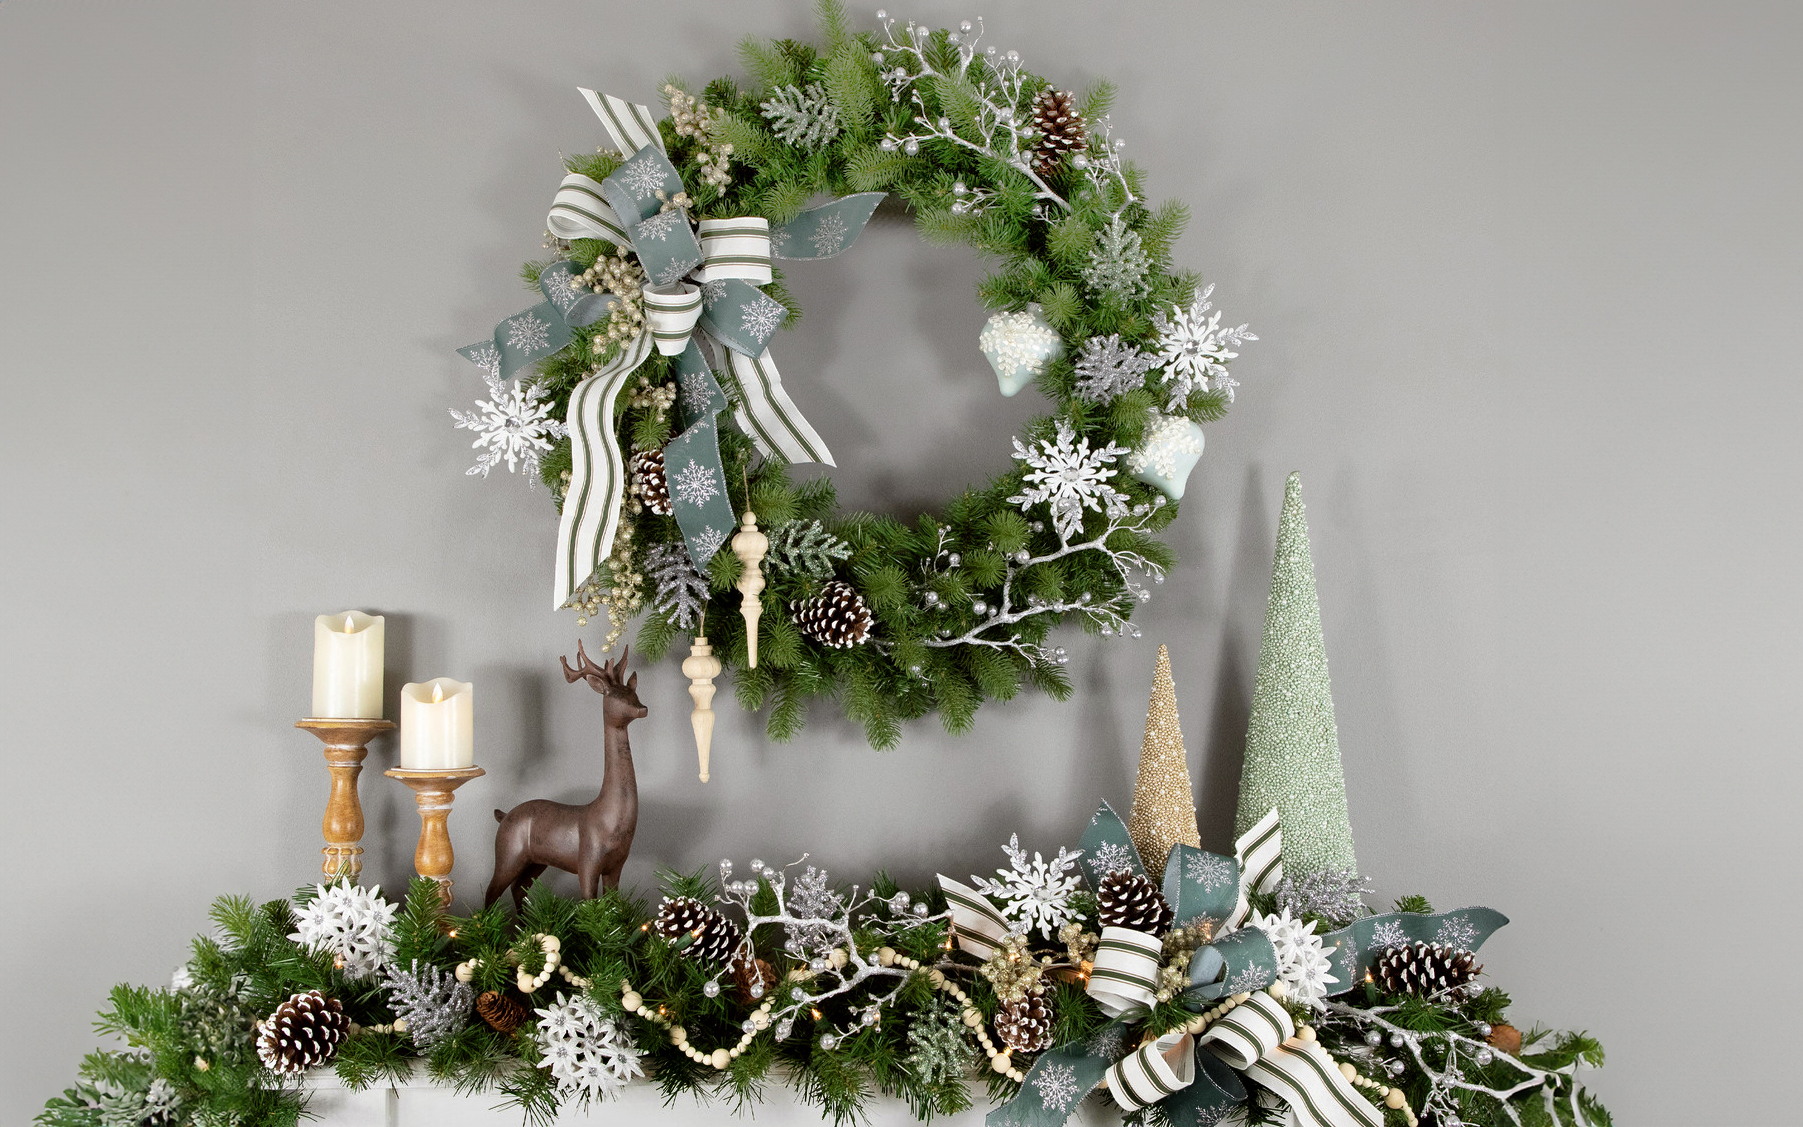 Real Touch wreaths and garland offer realistic foliage for your holiday decorating